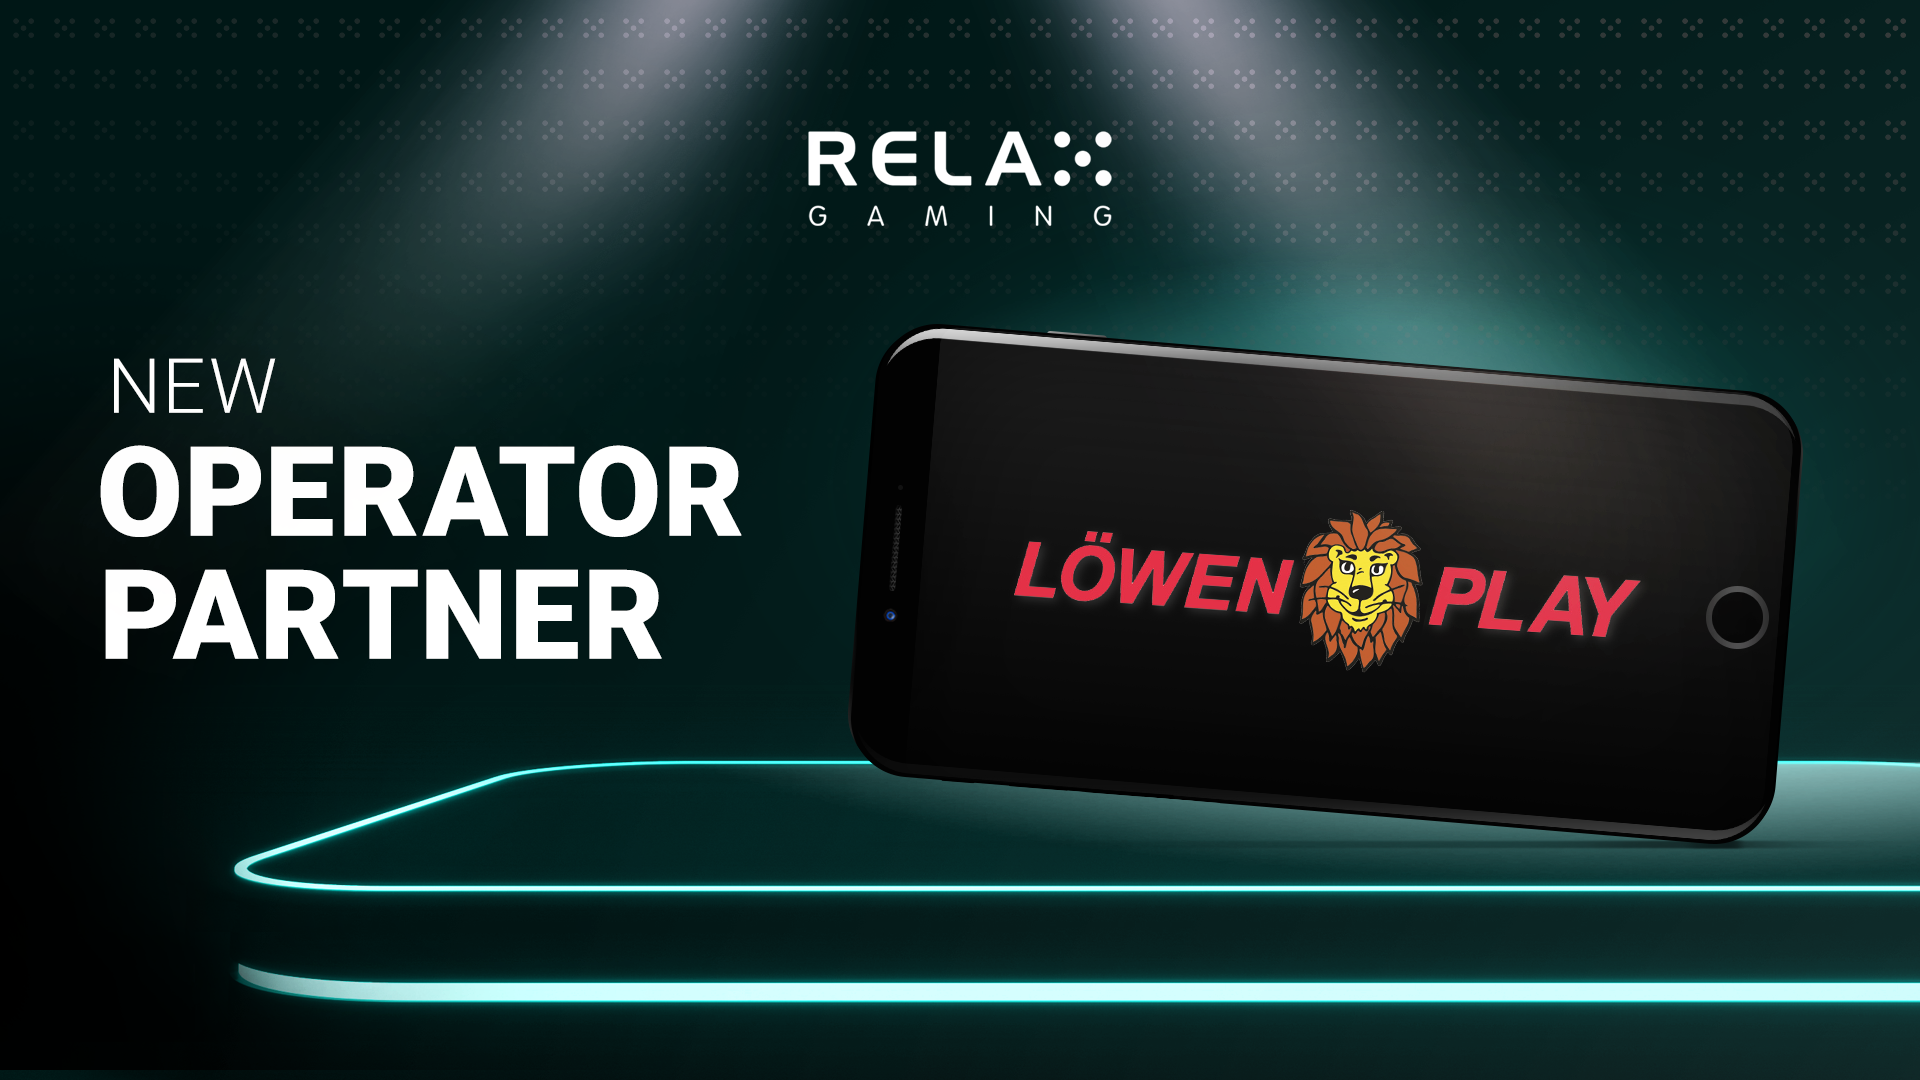 Relax Gaming prepares for expansion in Germany with Loewen Play deal  